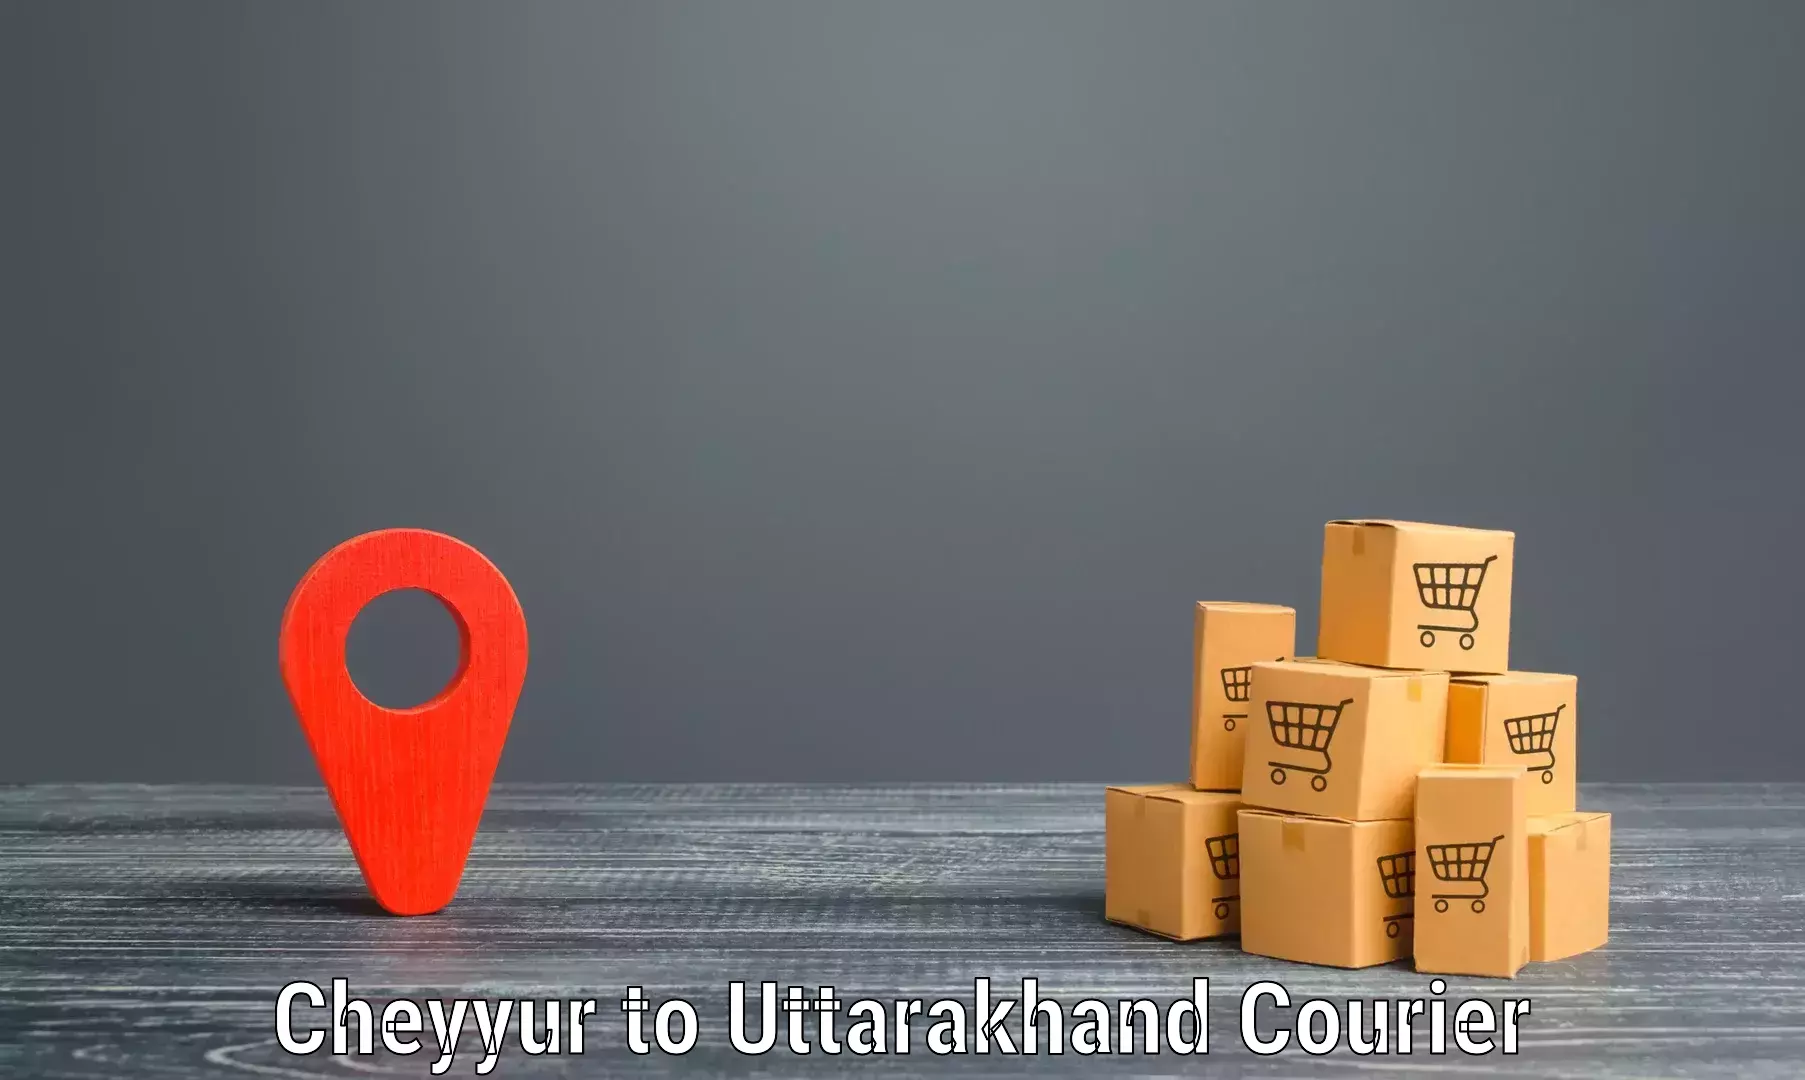 Multi-service courier options Cheyyur to IIT Roorkee